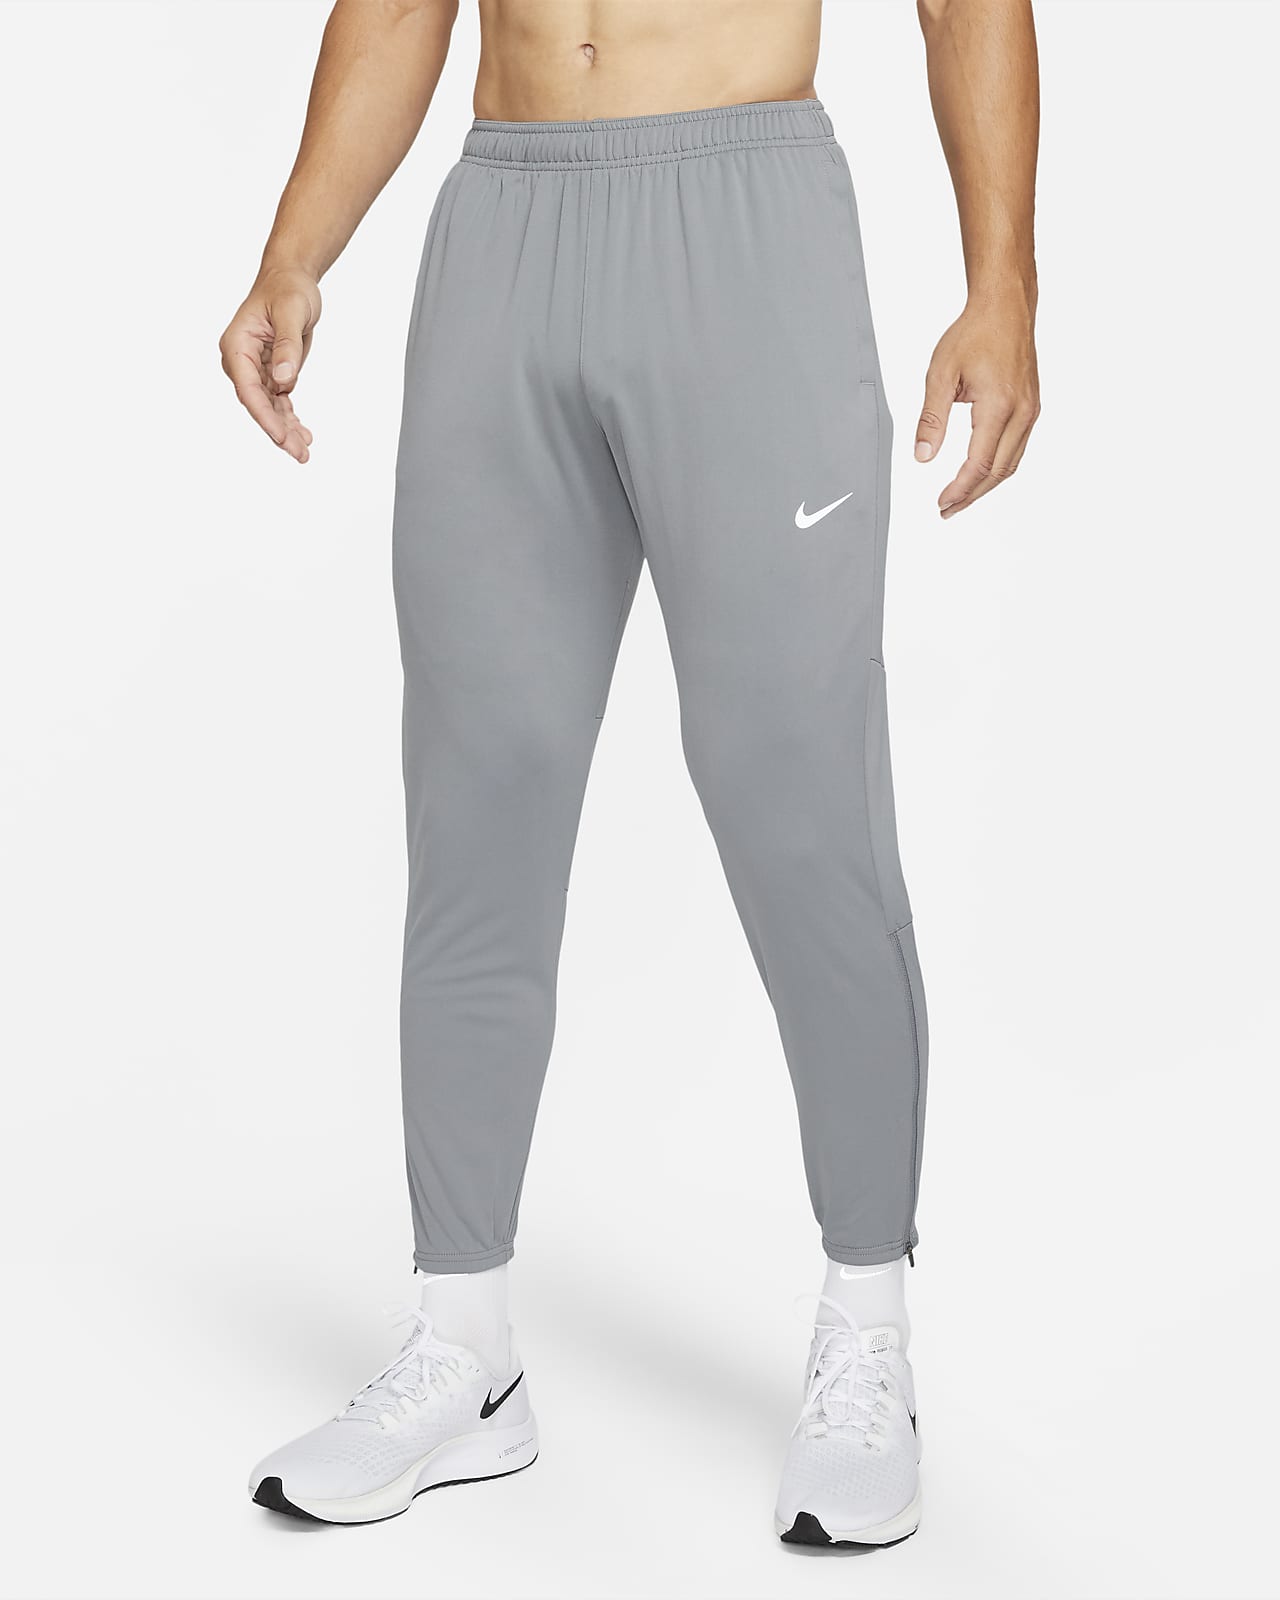 Weird Comparison invention Nike Dri-FIT Challenger Men's Knit Running Pants. Nike.com